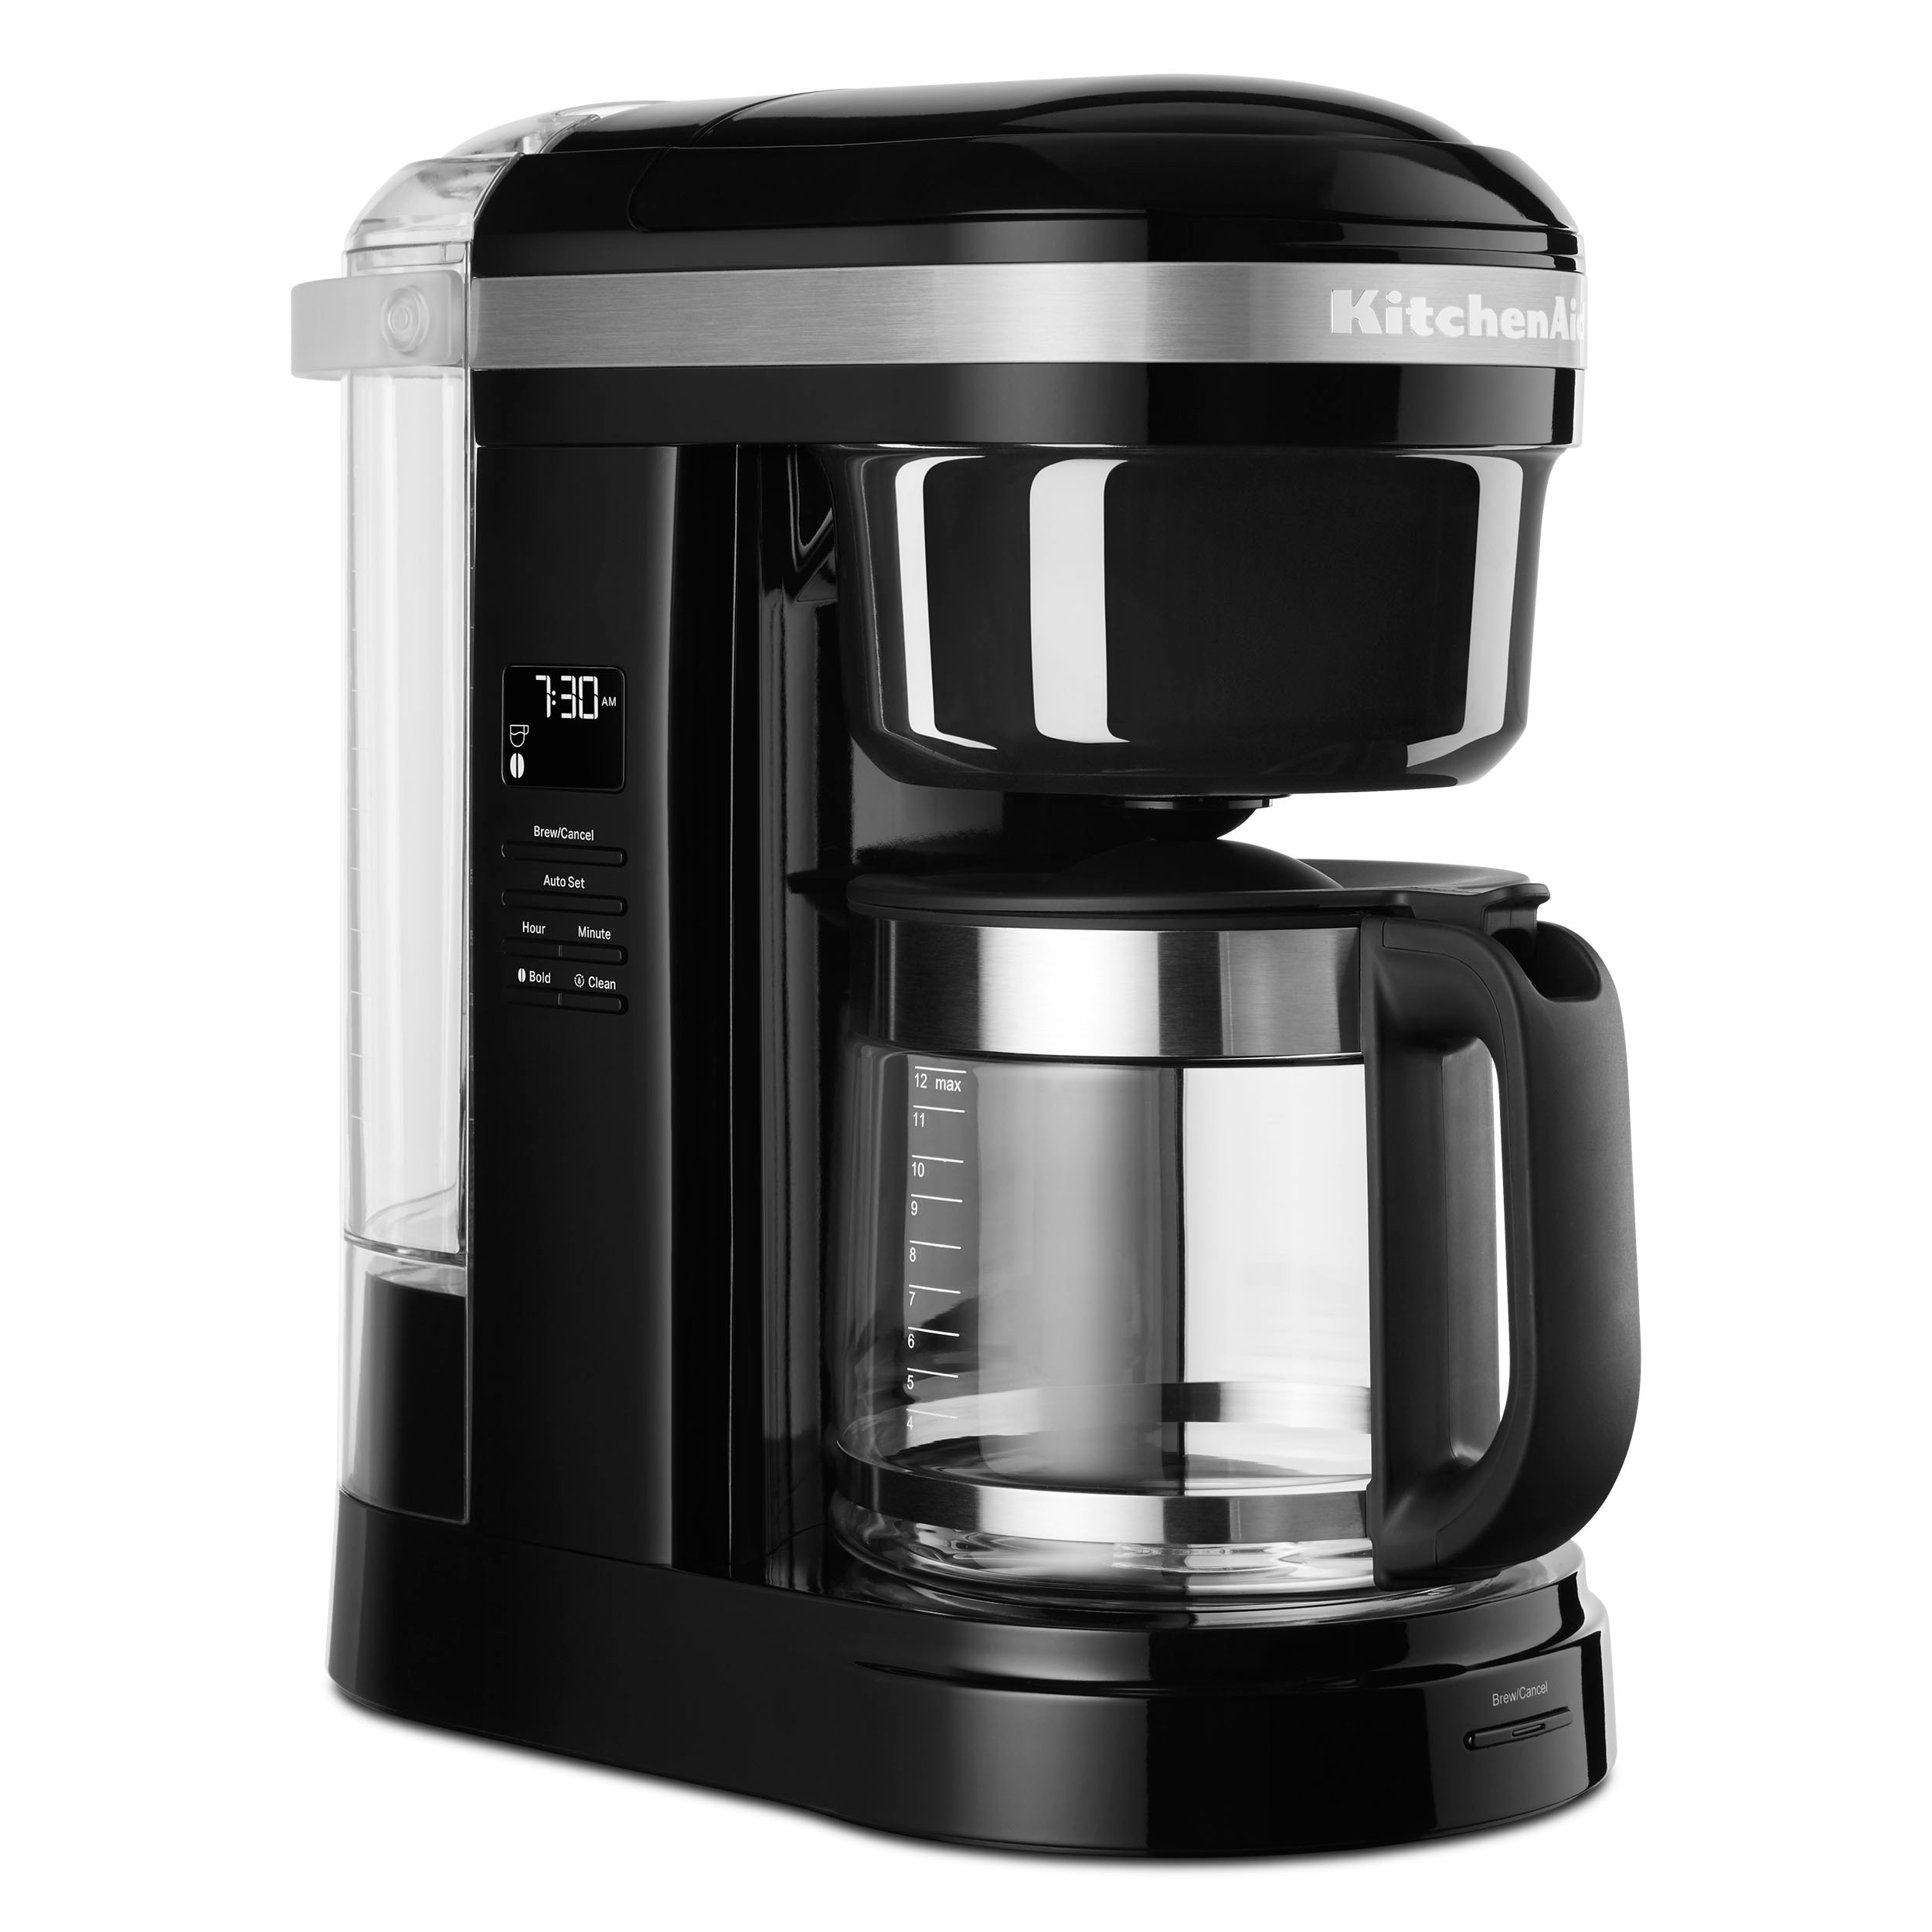 KitchenAid Cold Brew Coffee Maker with 12-Cup Capacity - Stainless Steel